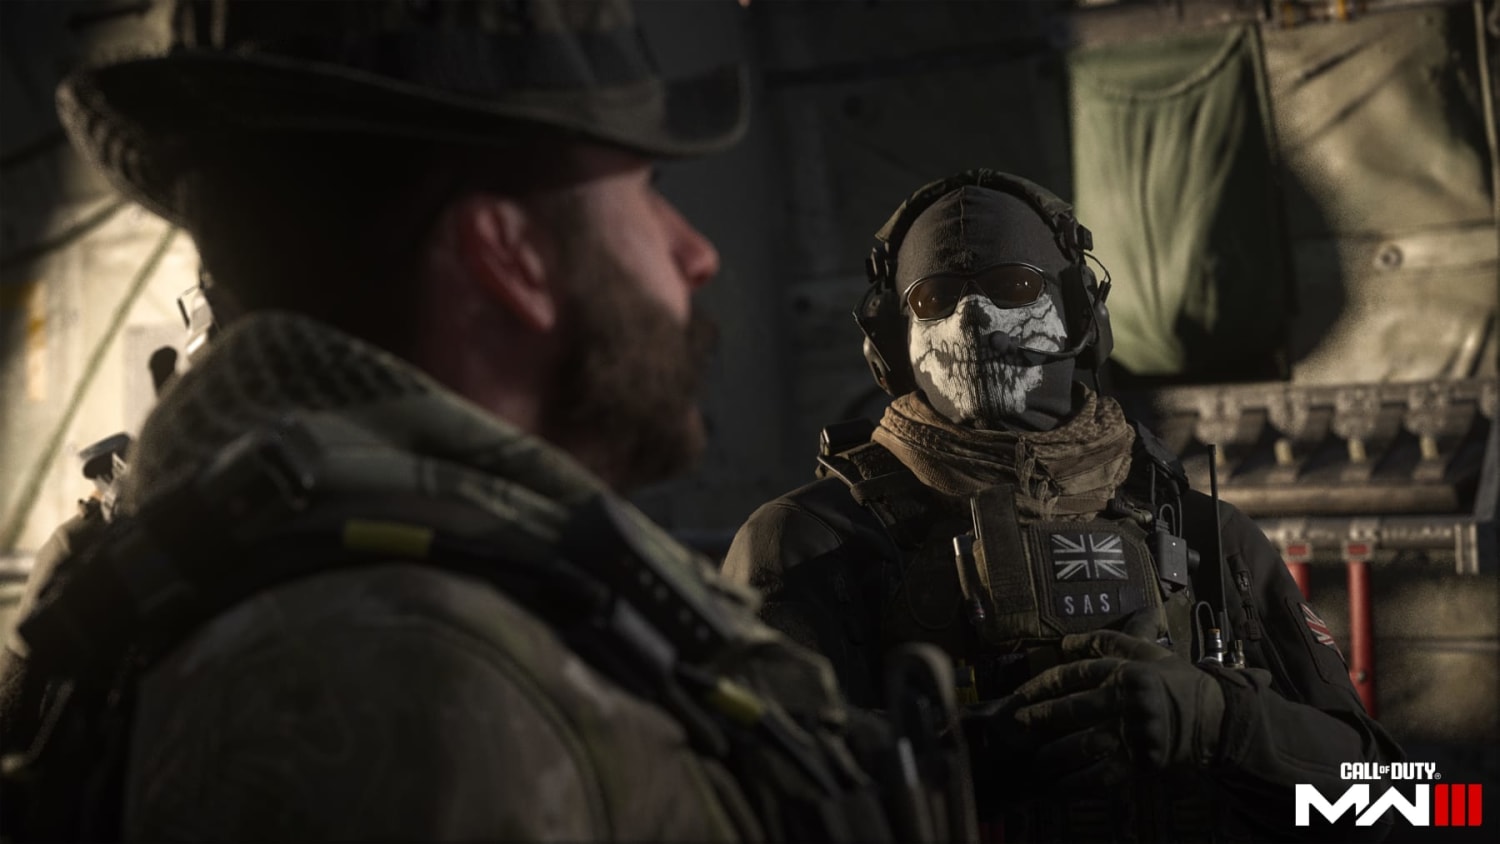 CoD: Vanguard PlayStation exclusive content officially revealed - Charlie  INTEL